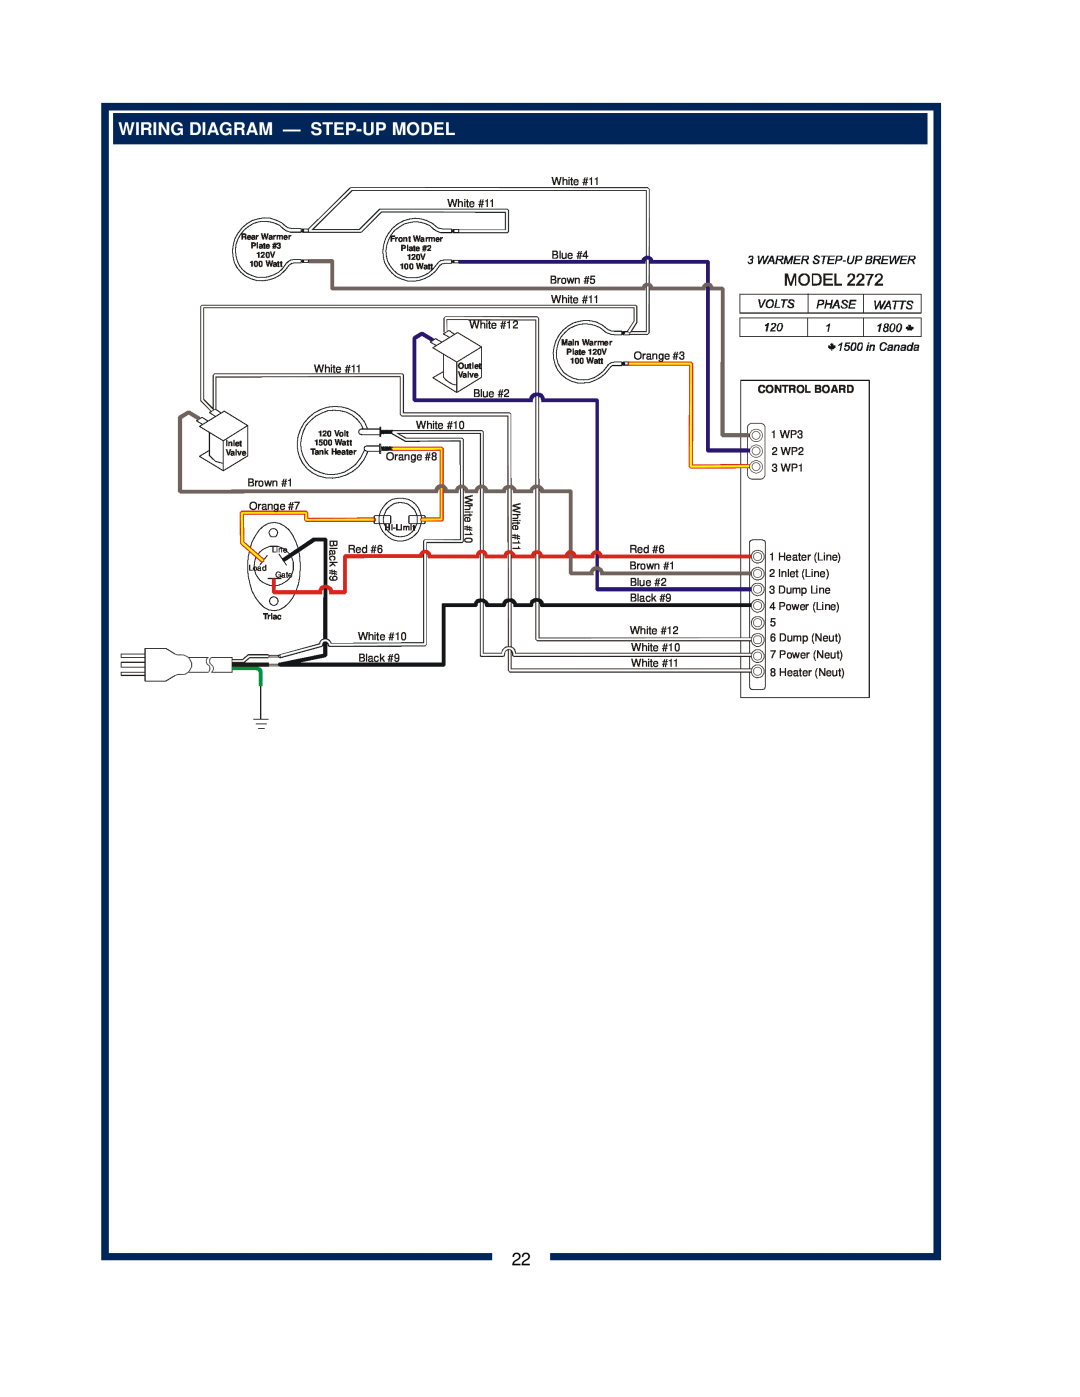 Bloomfield 2272, 2216EX, 2274EX, 2212 owner manual Wiring Diagram - Step-Up Model, Control Board 